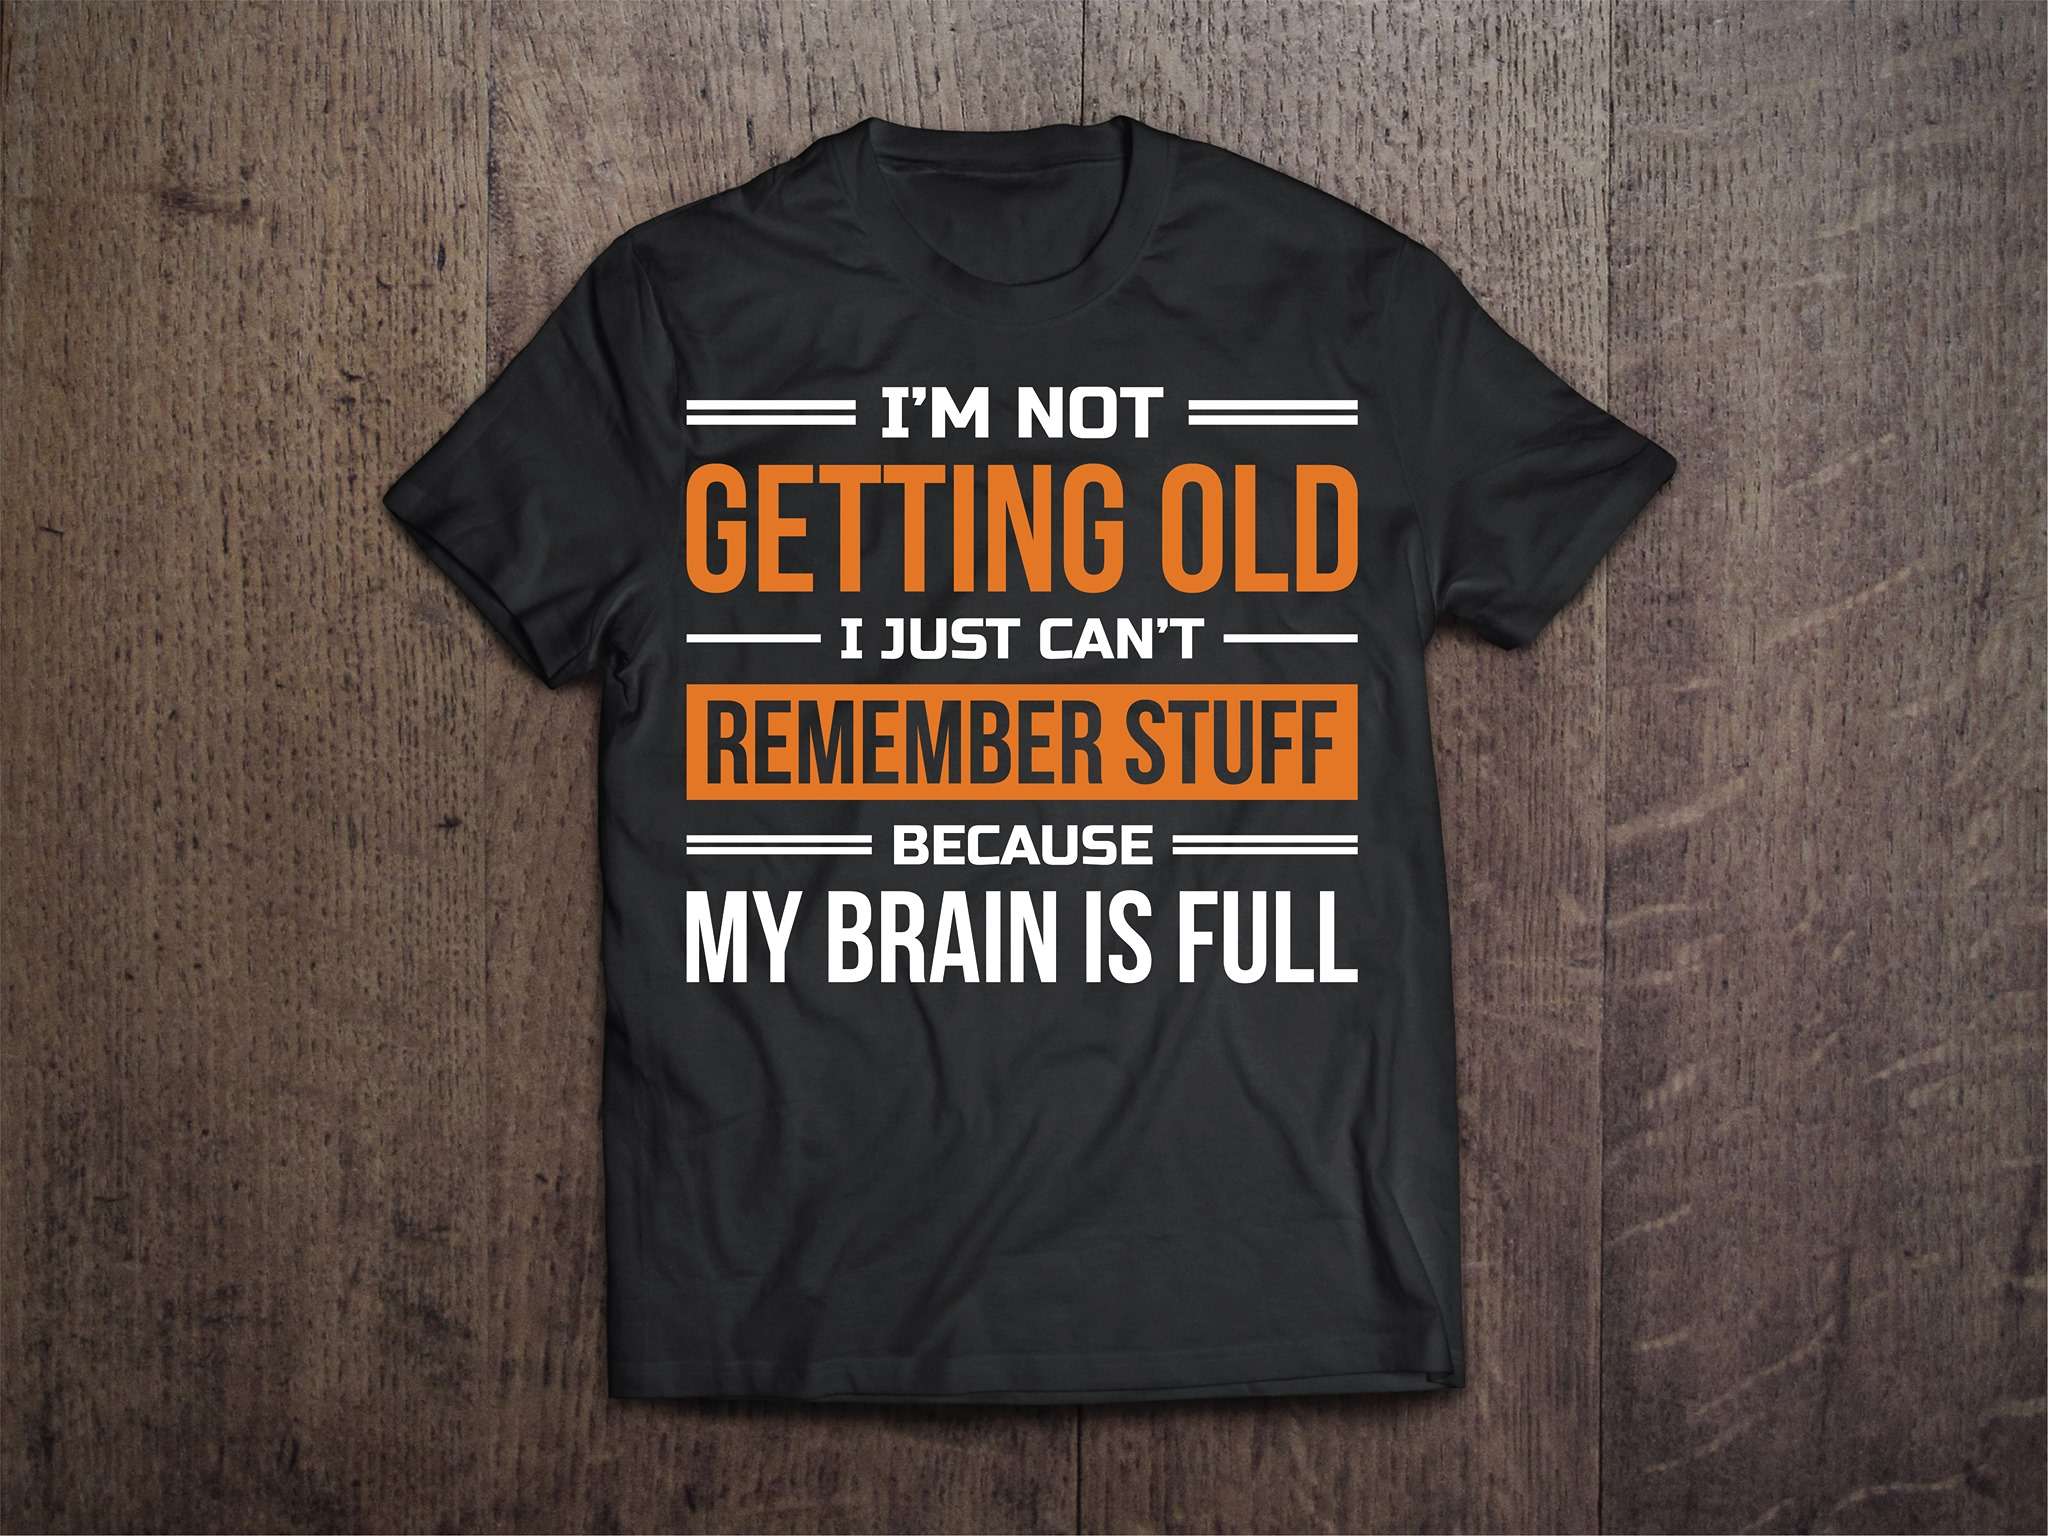 I'm not getting old I just can't remember stuff because my brain is full